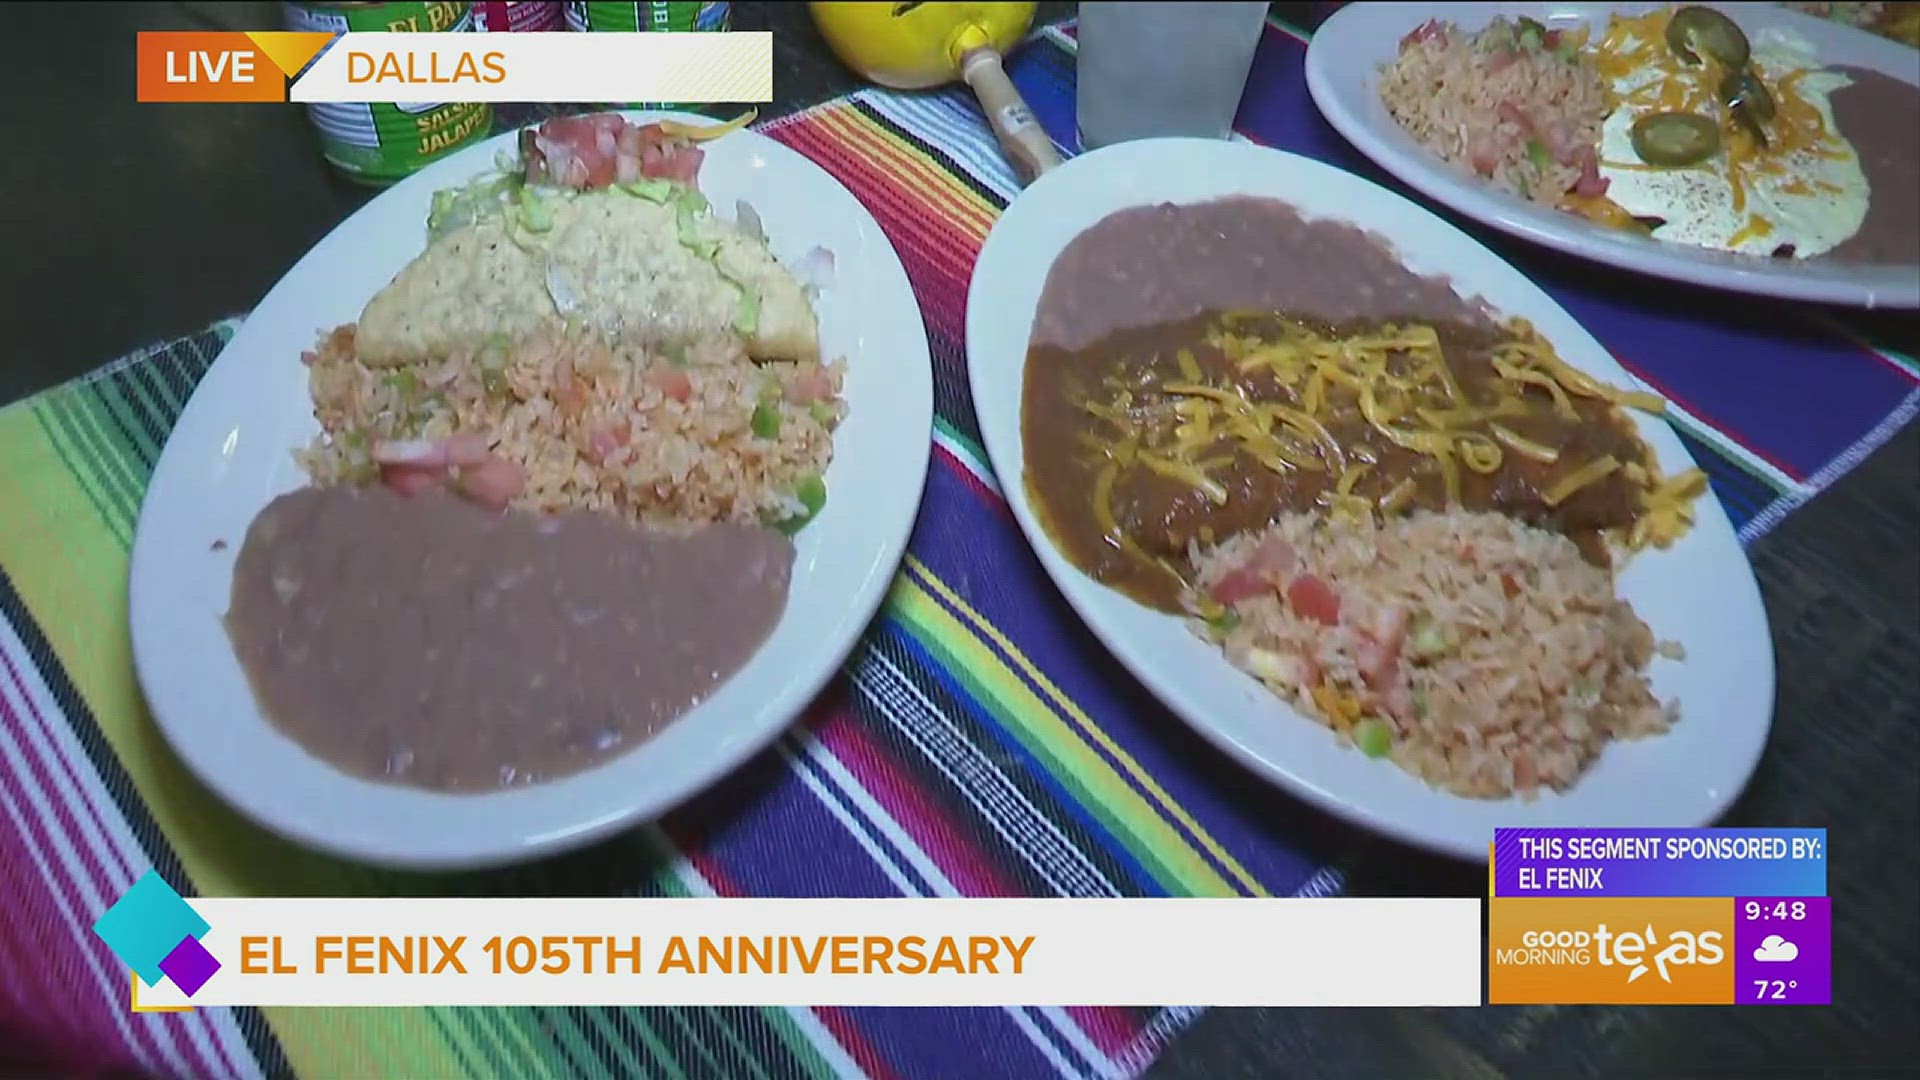 We find out what El Fenix has planned for their 105th anniversary. This segment is sponsored by El Fenix. Go to elfenix.com for more information.